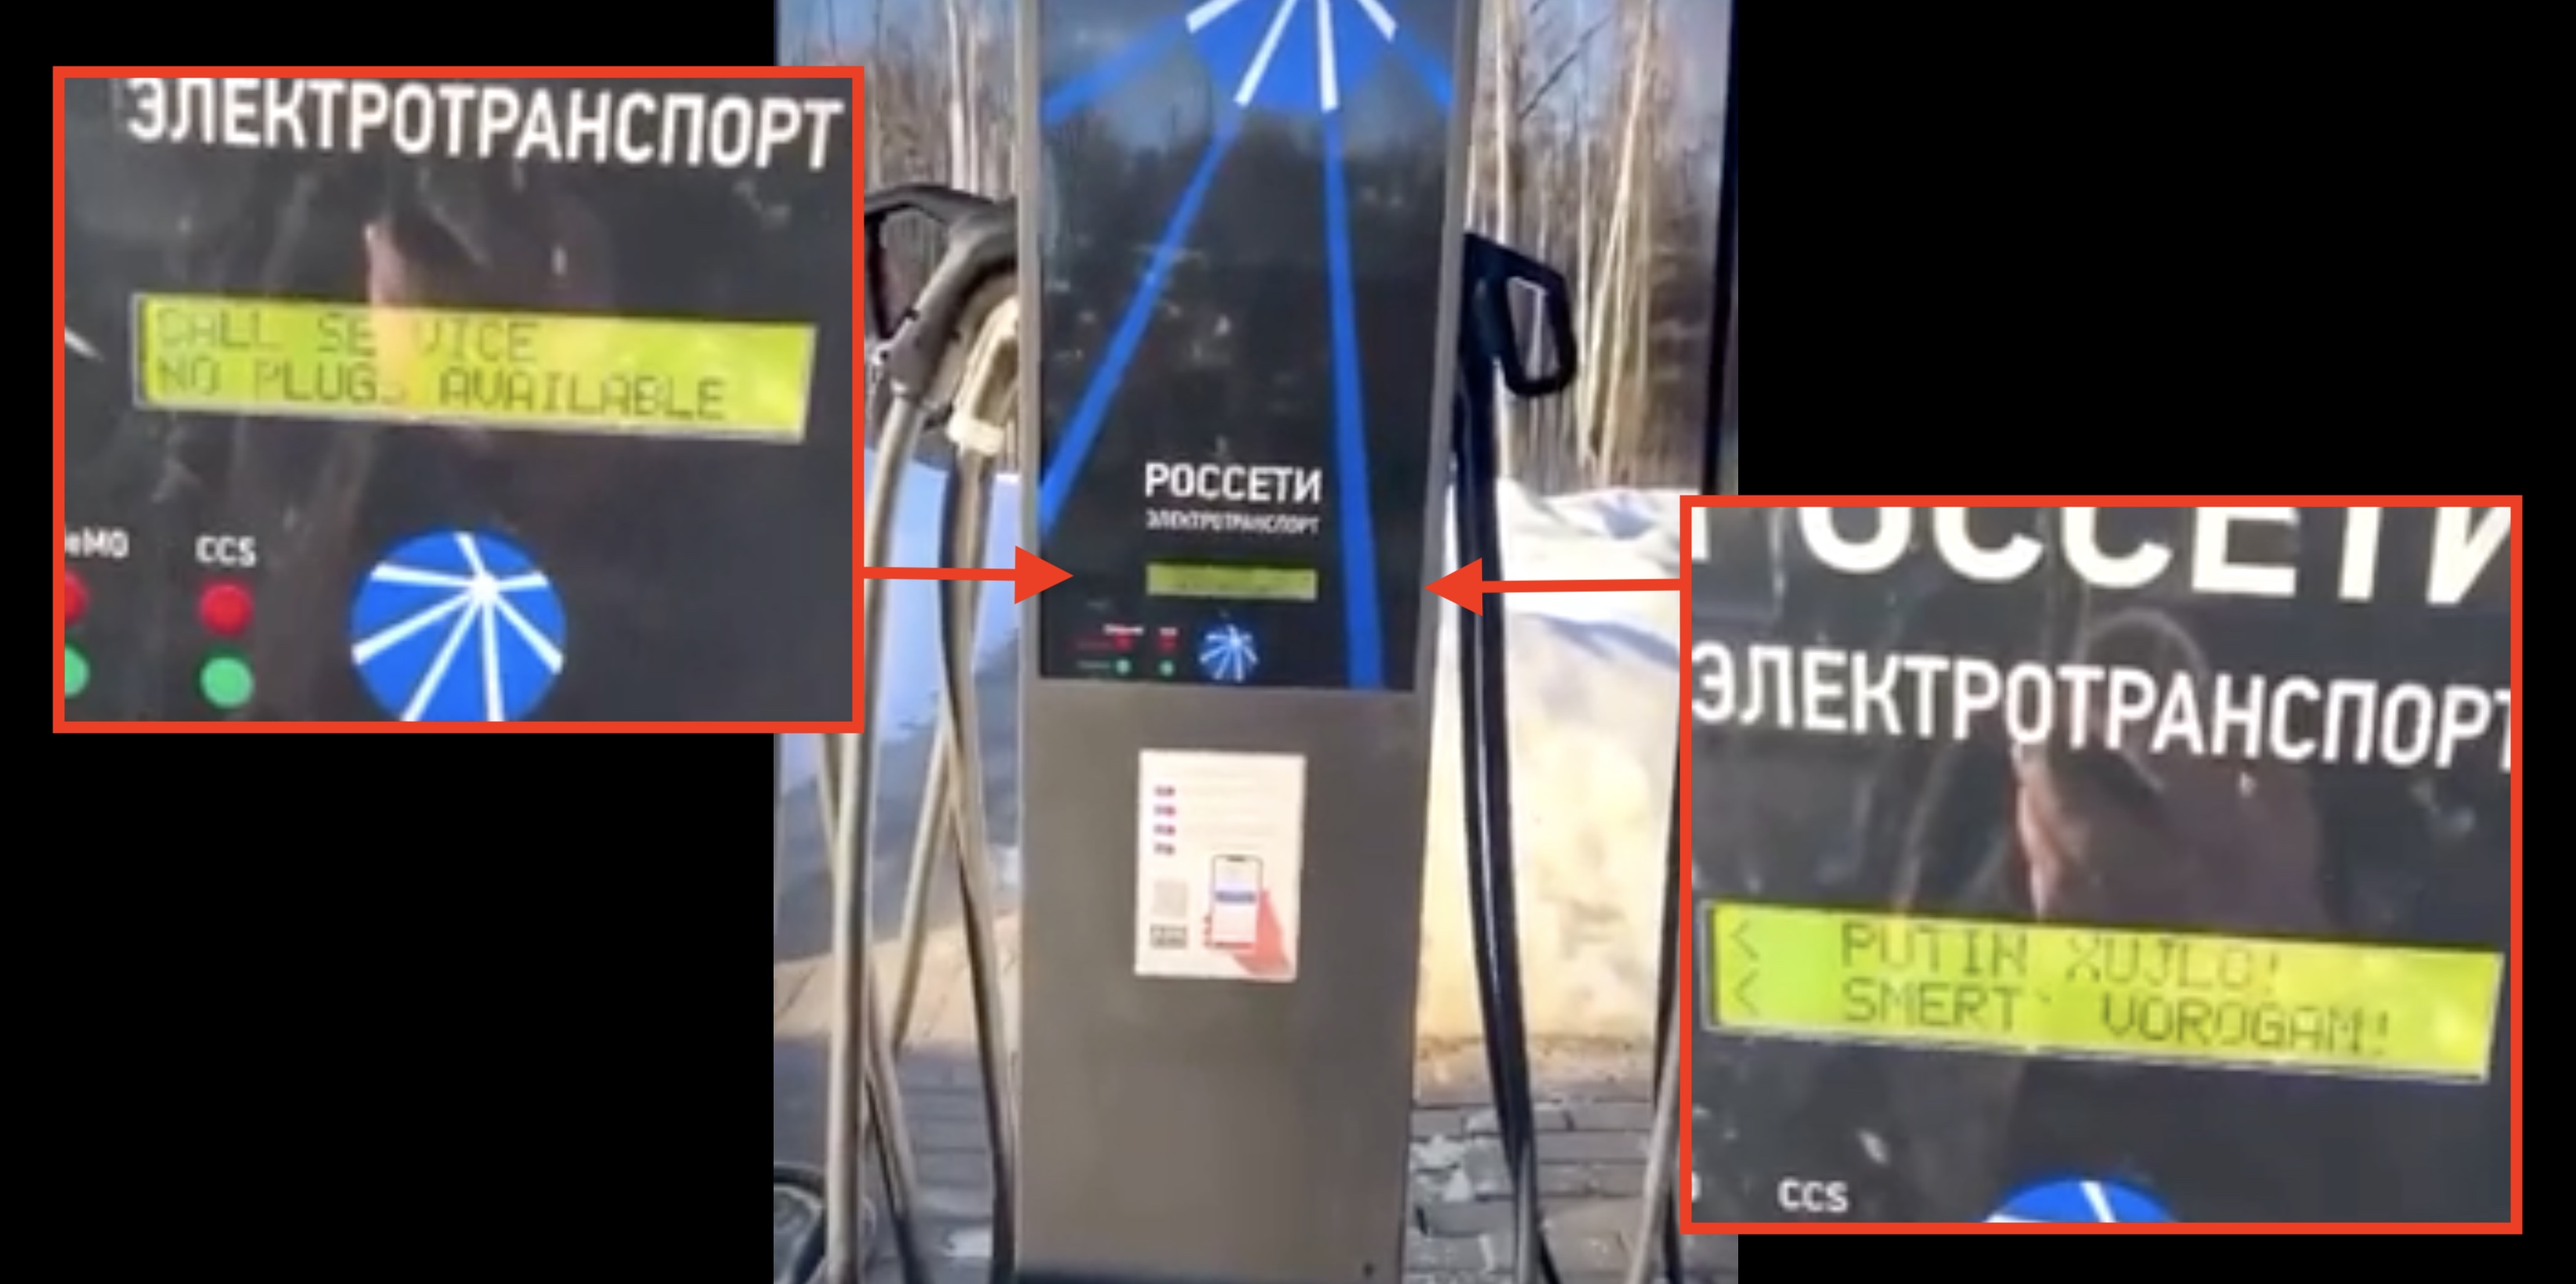 https://electrek.co/wp-content/uploads/sites/3/2022/02/hacked-ev-charging-station-in-russia.jpg?quality=82&strip=all